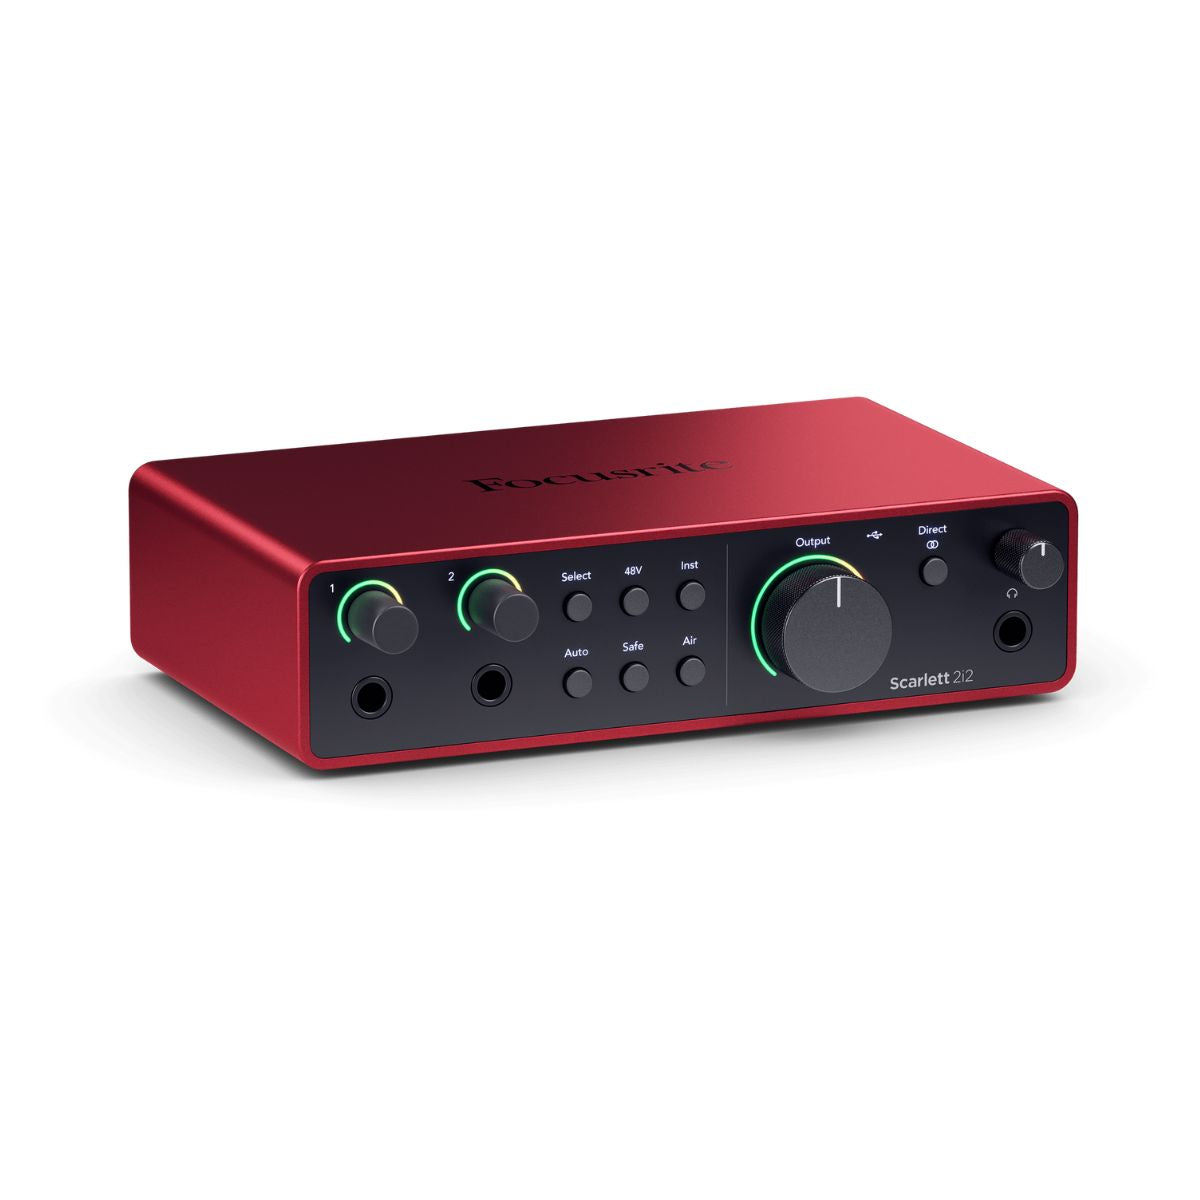 Focusrite Scarlett 2i2 Studio 4th Gen / 3rd Gen USB Audio Interface with Microphone & Monitor Headphone for Simultaneous Vocals & Guitar Recording